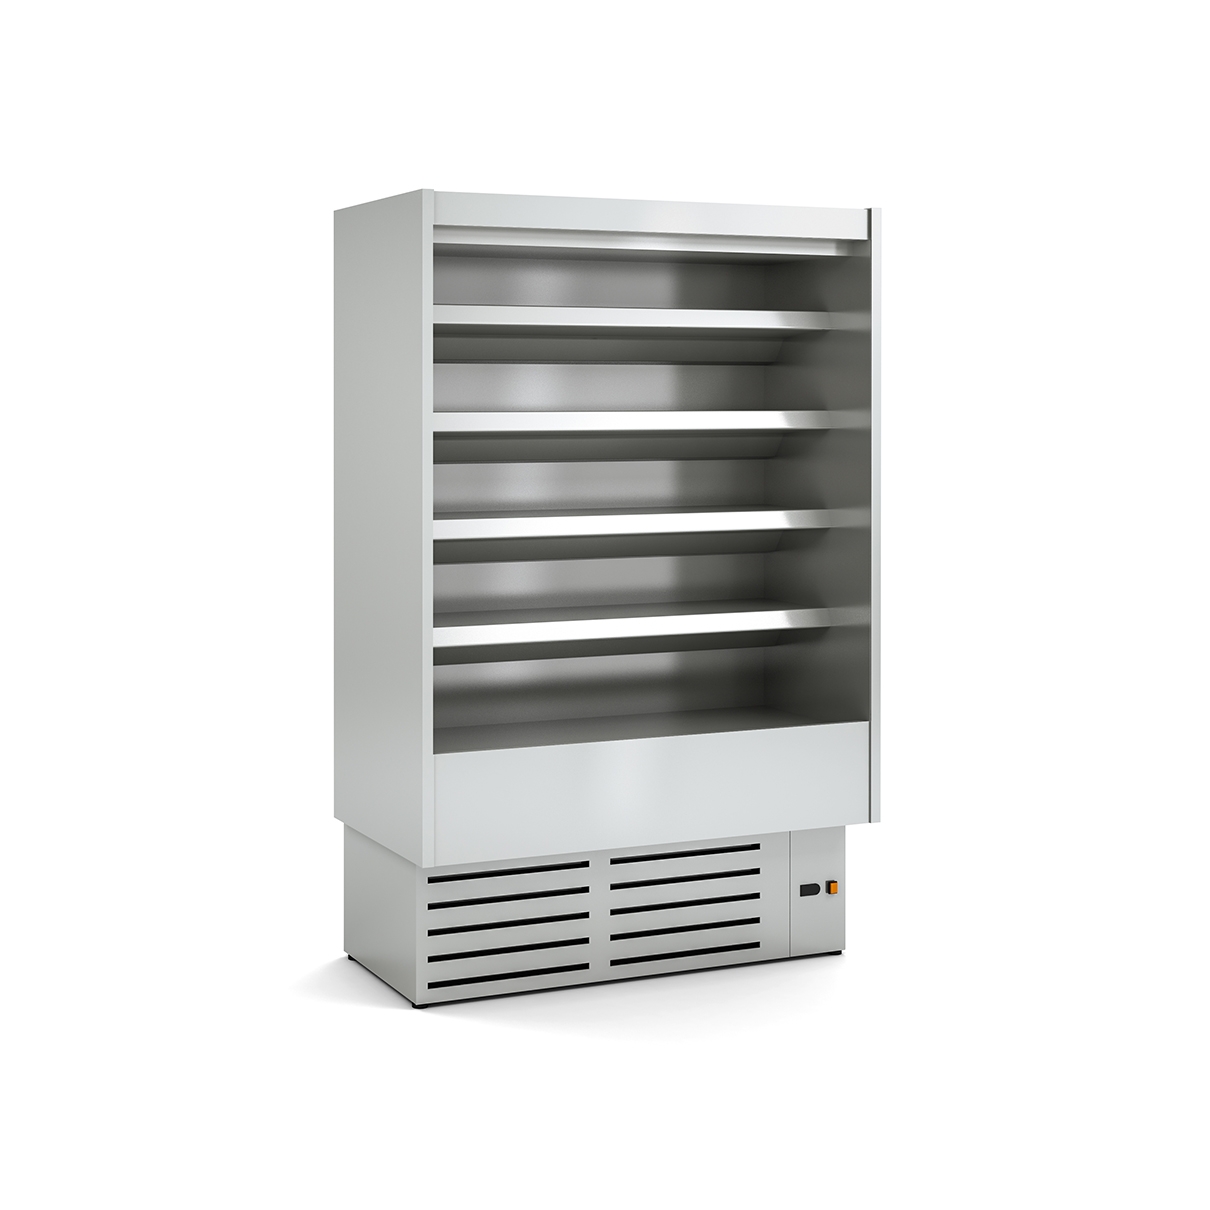 REFRIGERATED WALL CABINET DS3 I M1-M2